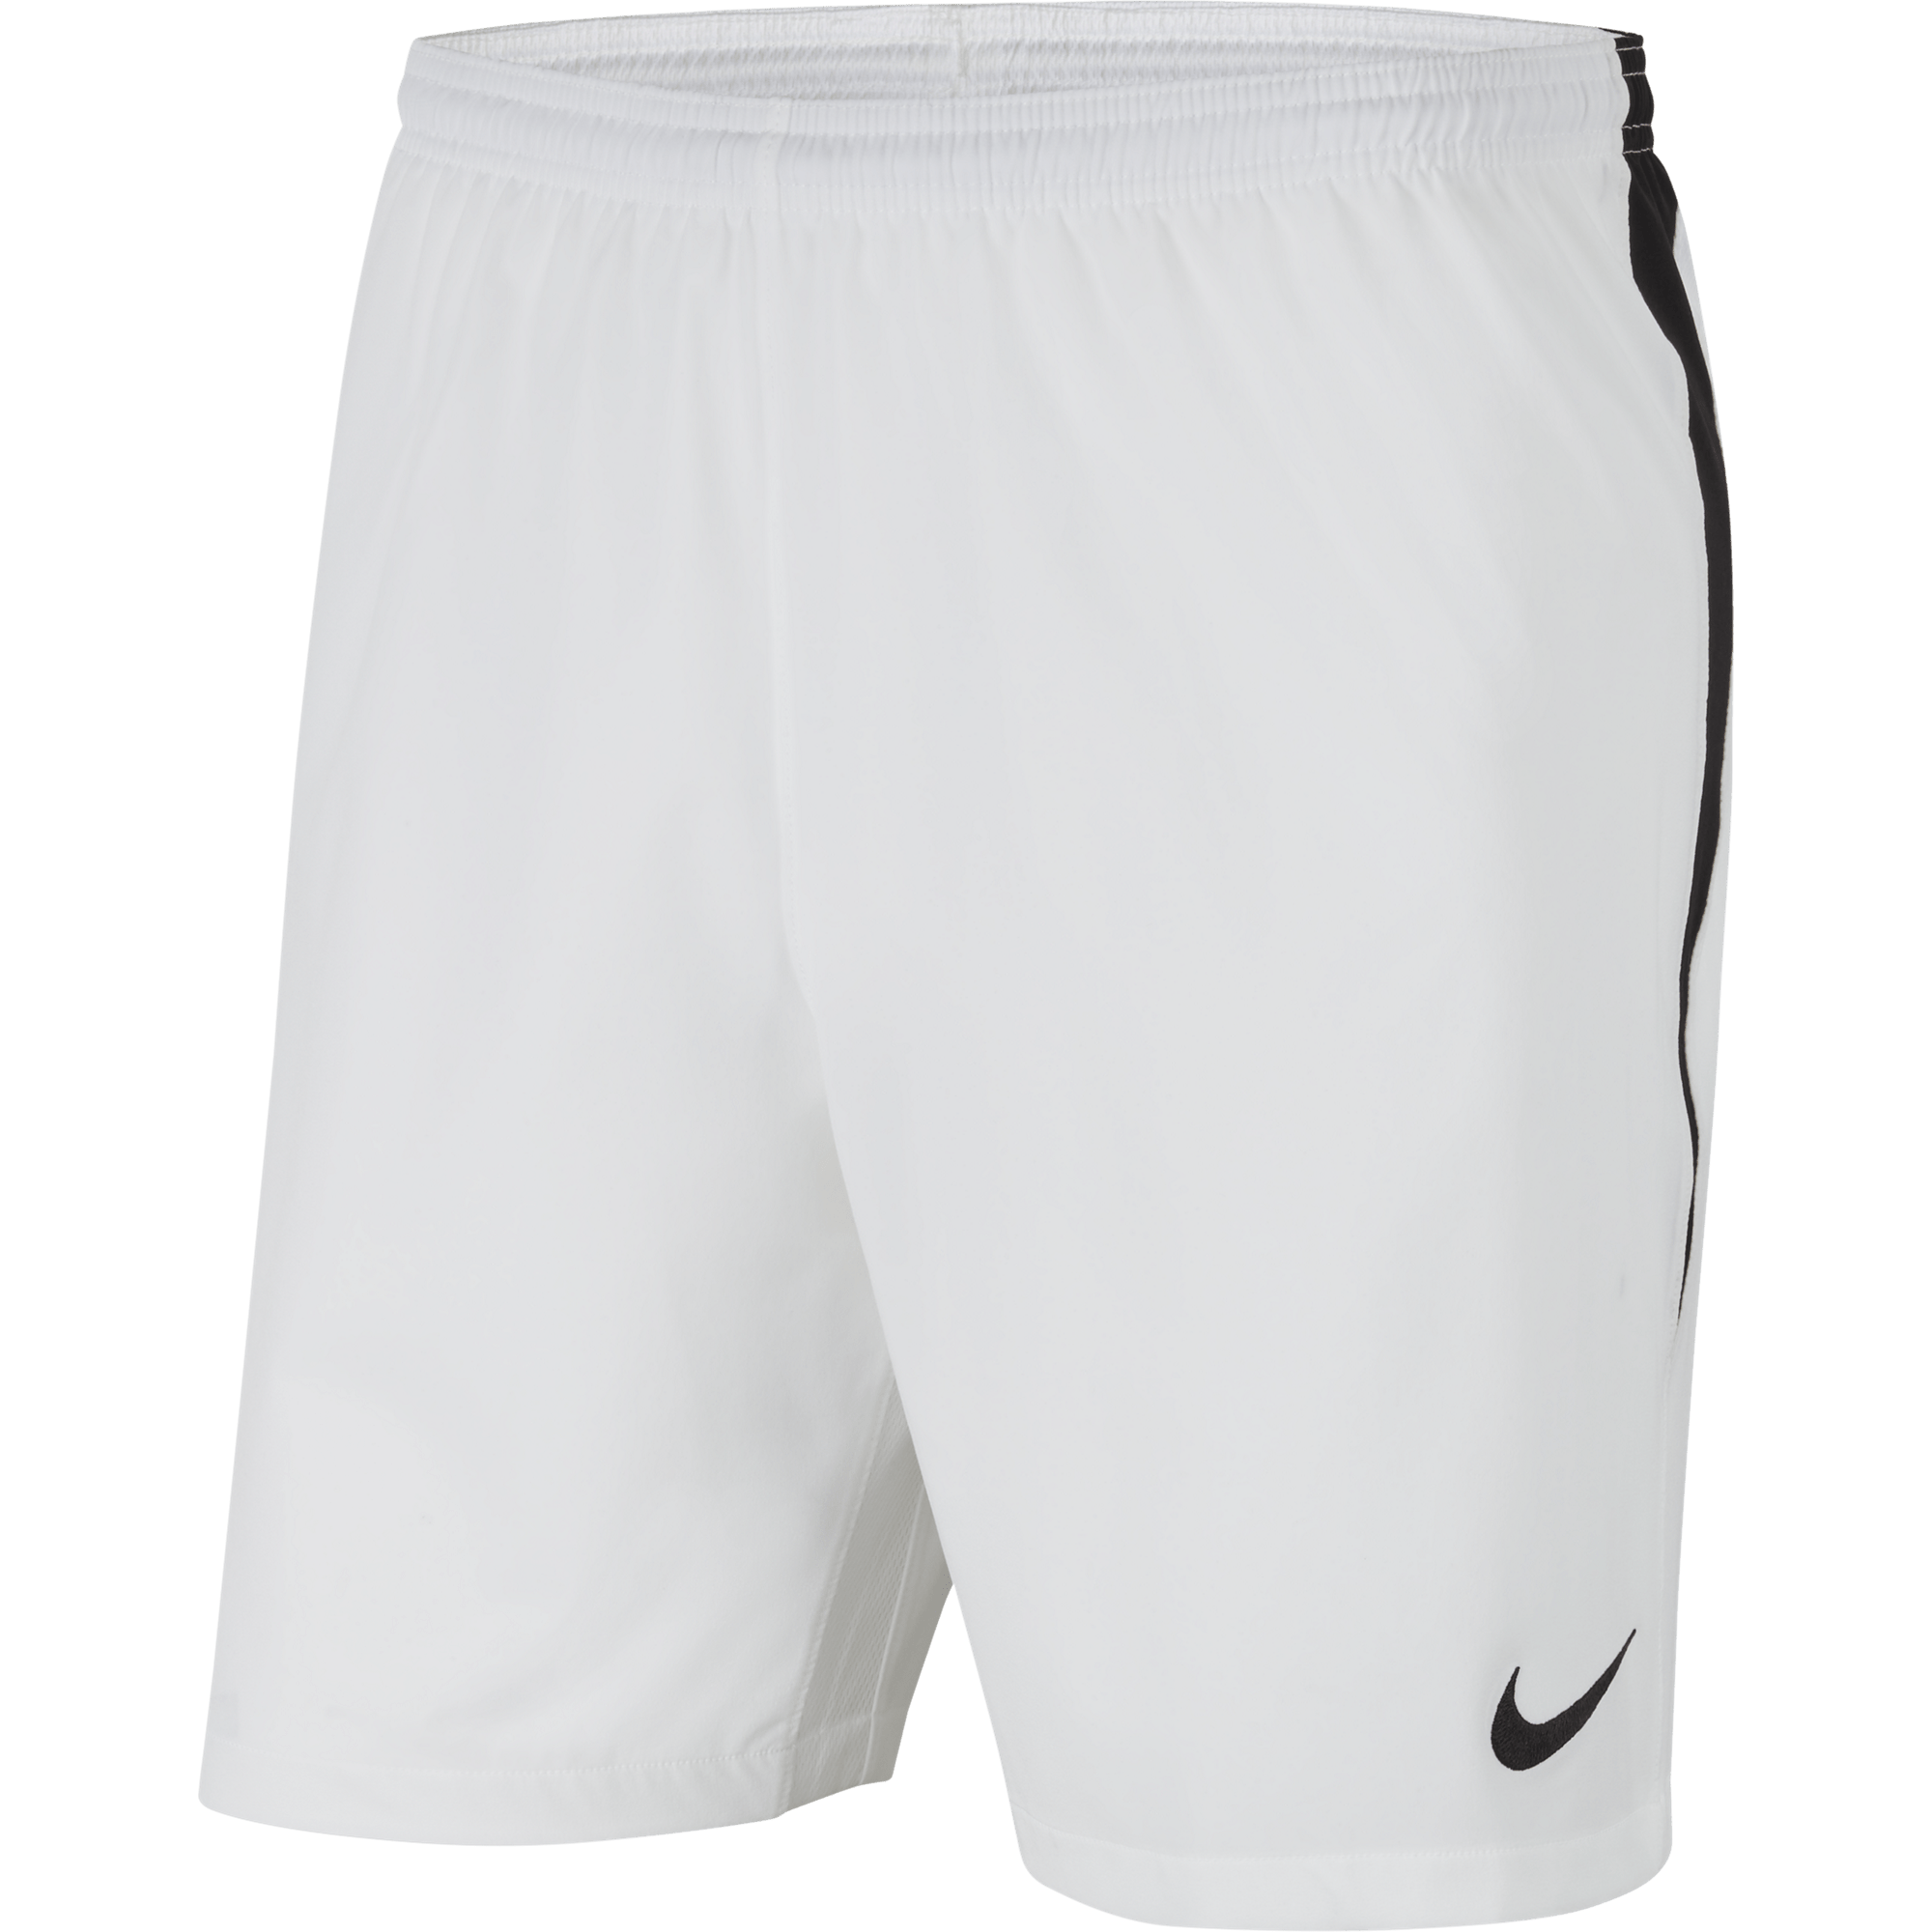 Met andere bands Droogte Lief Nike Venom III Woven Shorts - White – Pro-Am Kits